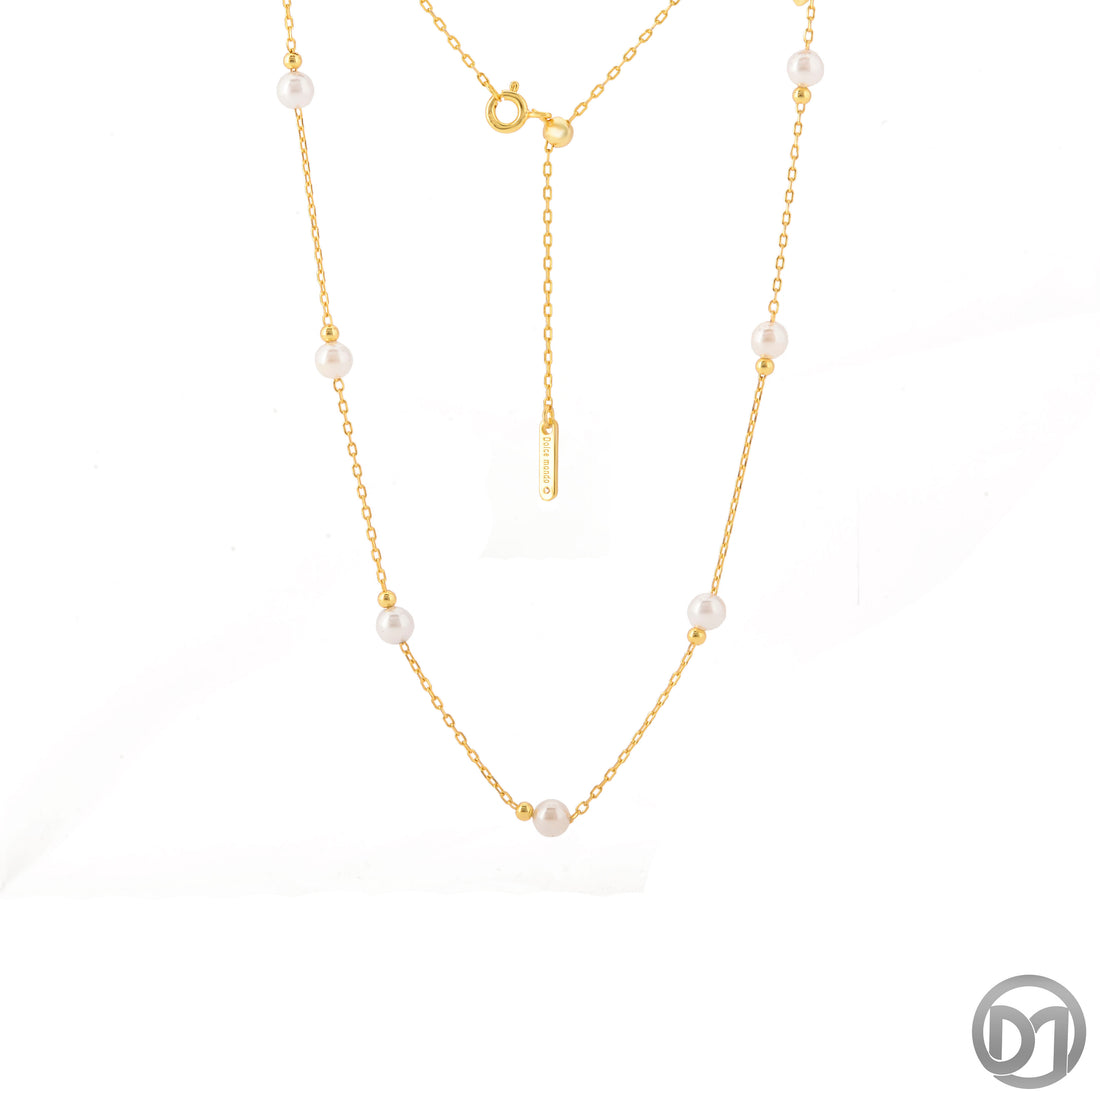 Elegant Silver 925 Chain Necklace with 8 Stunning 5mm Pearls - Dolce Mondo